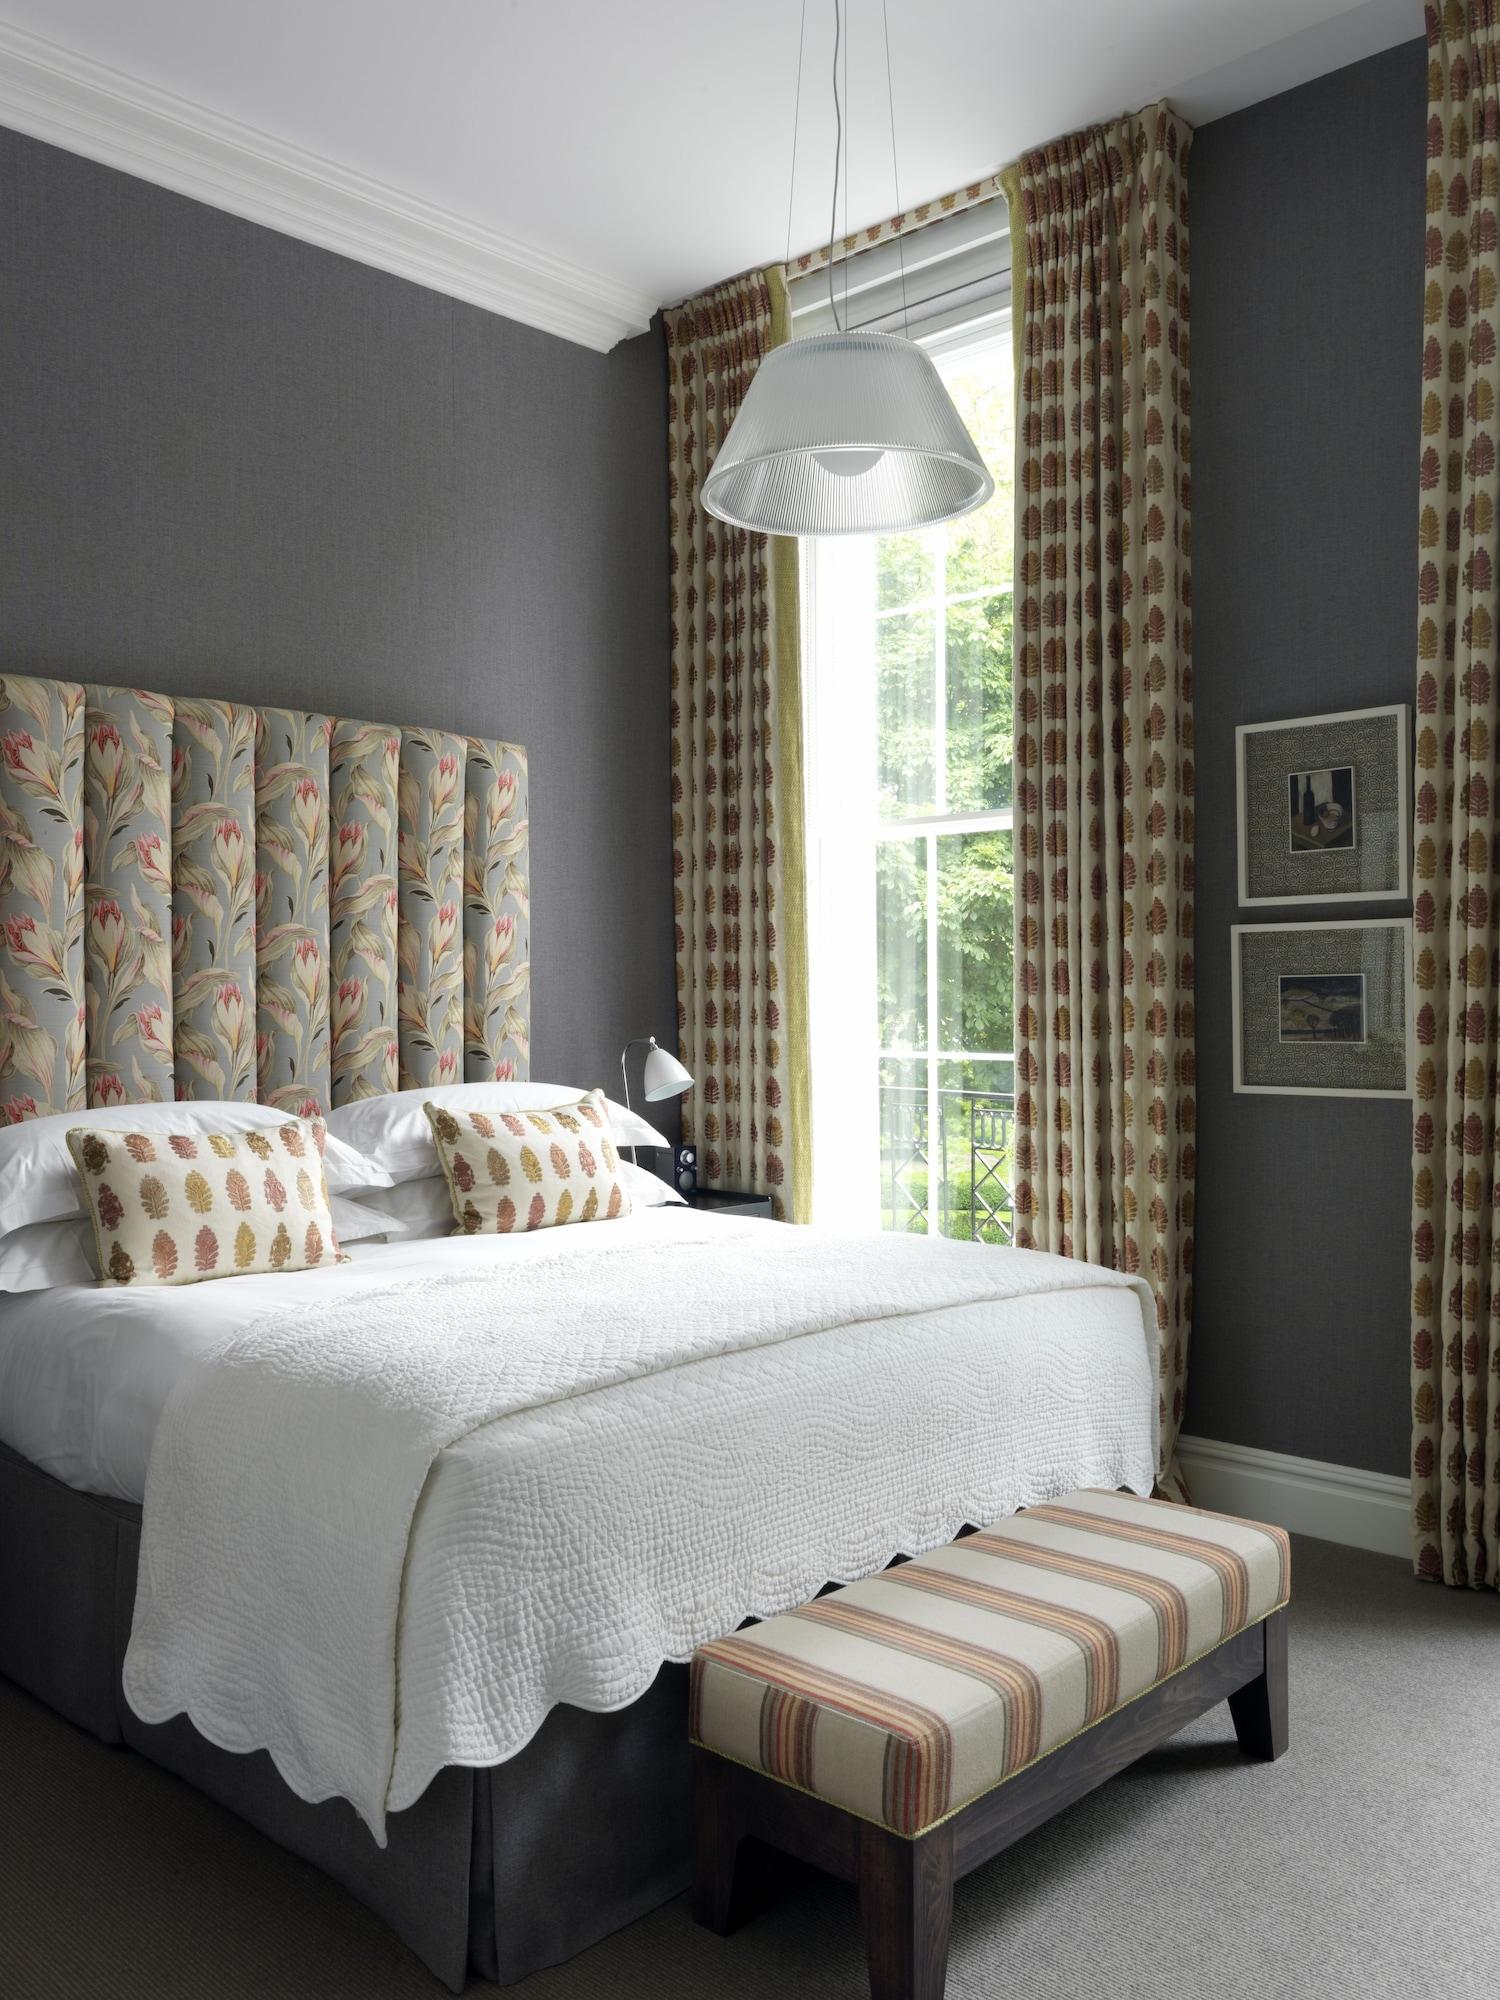 Dorset Square Hotel, Firmdale Hotels London Room photo